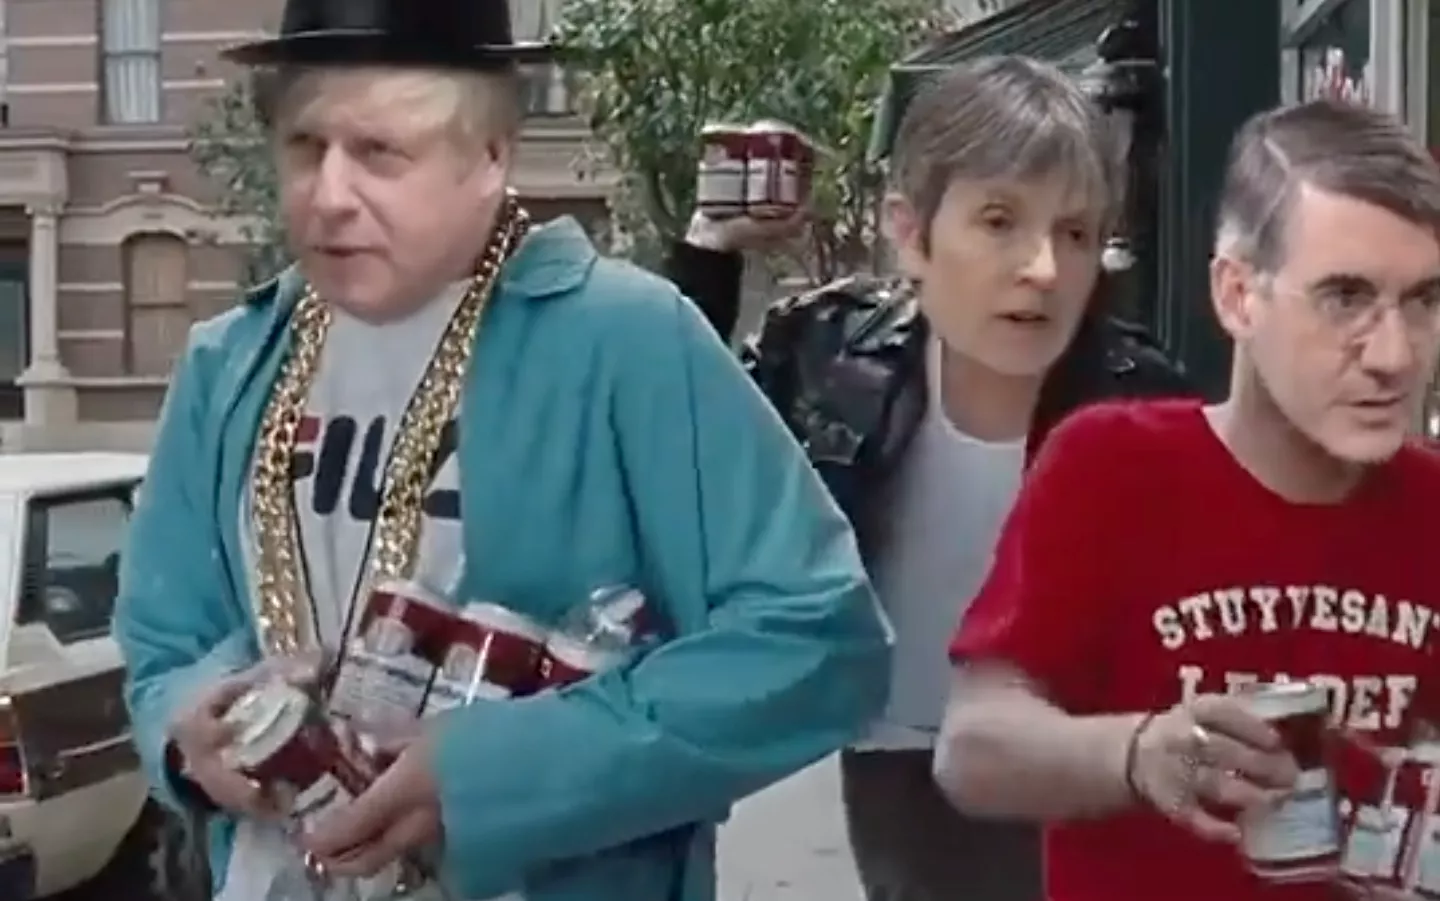 Boris Johnson fights for his right to party i underholdende video